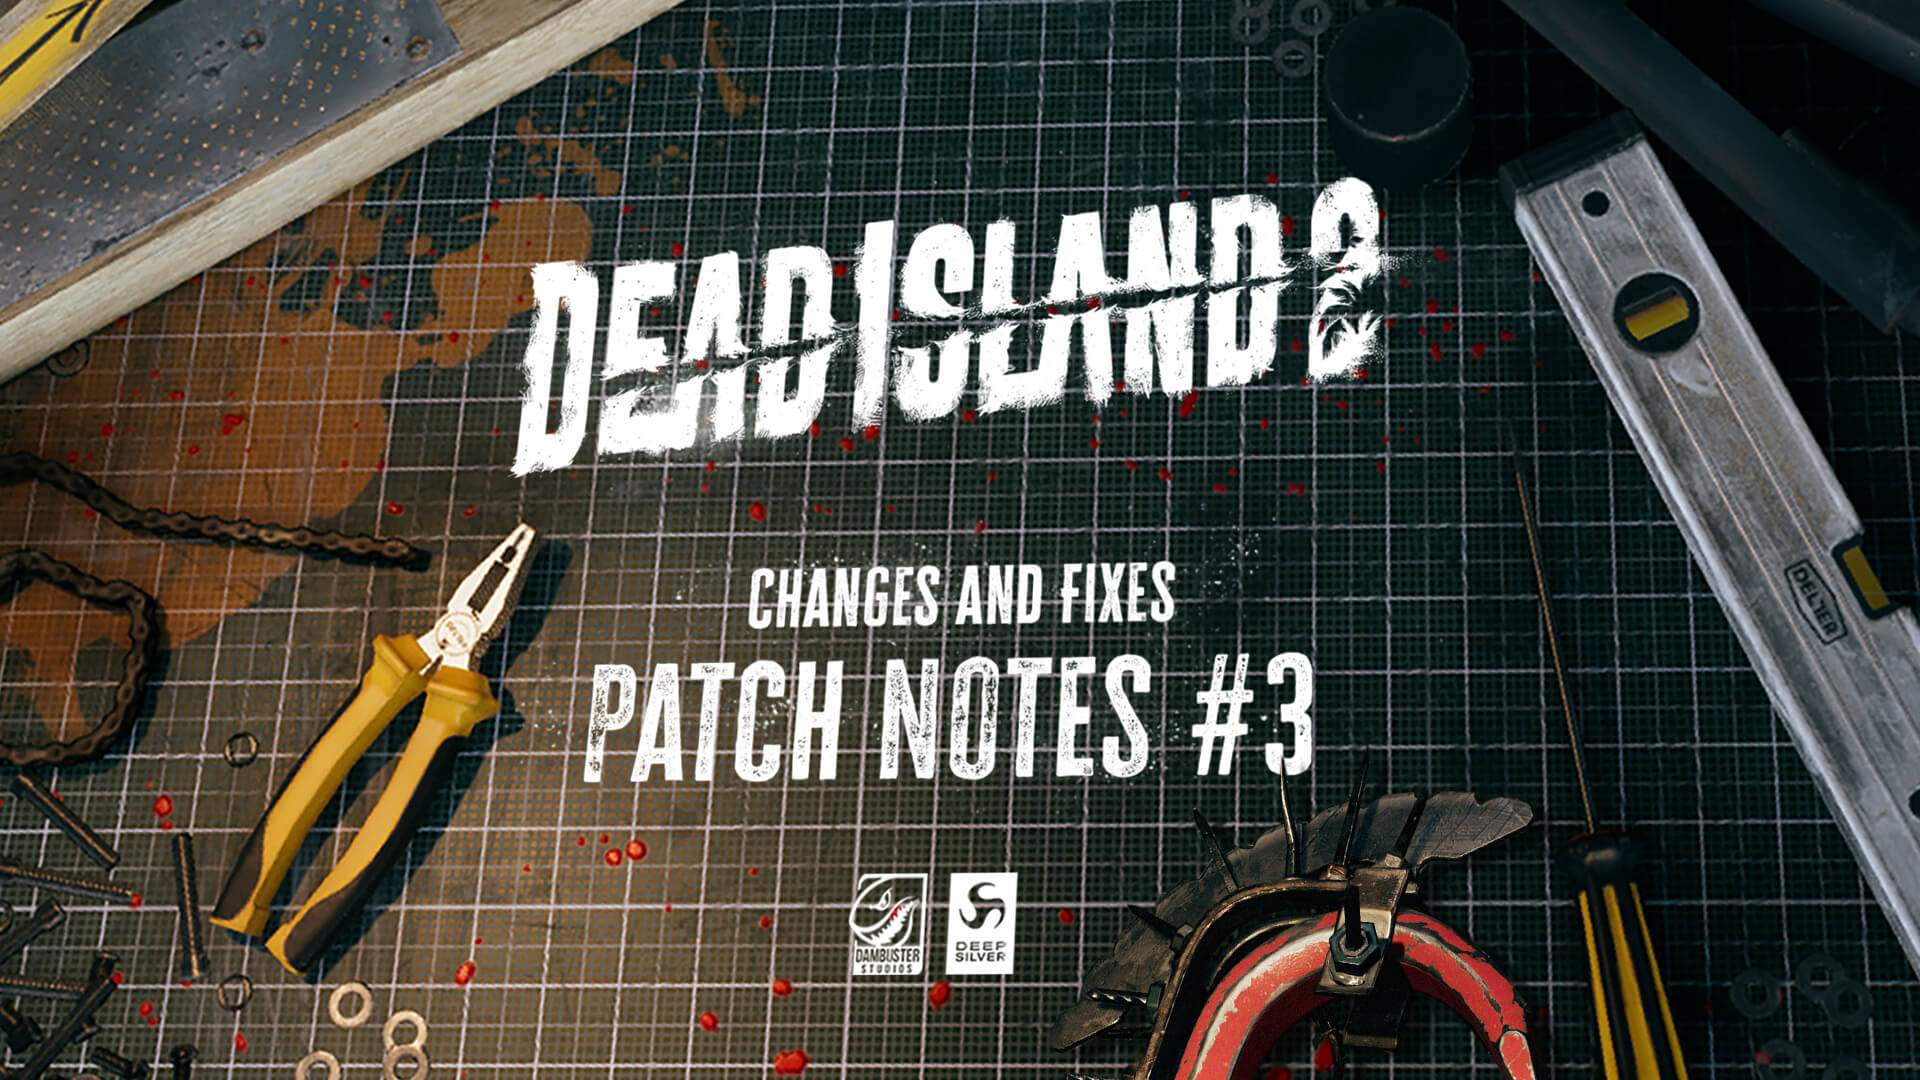 Dead Island 2 Haus expansion brings new locations, weapons & story in  November